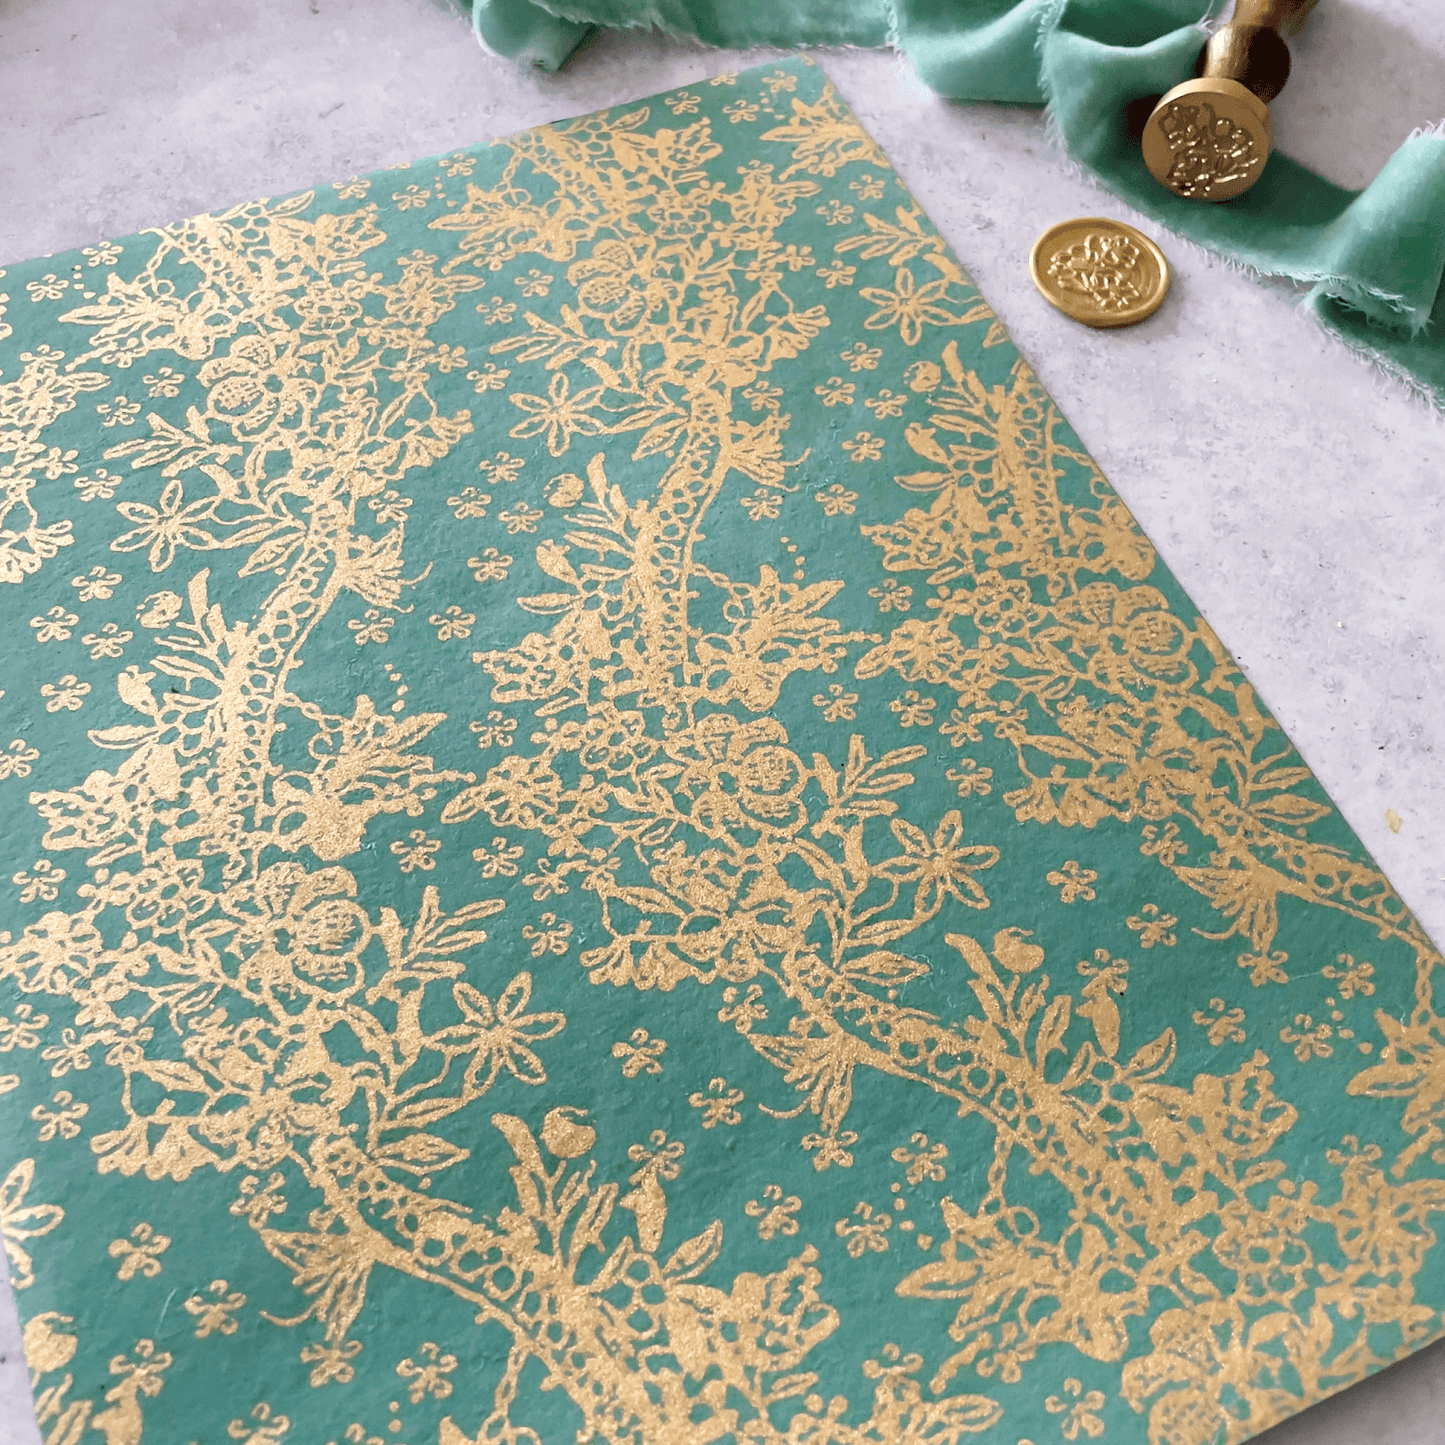 jade-green-and-gold-patterned-recycled-paper